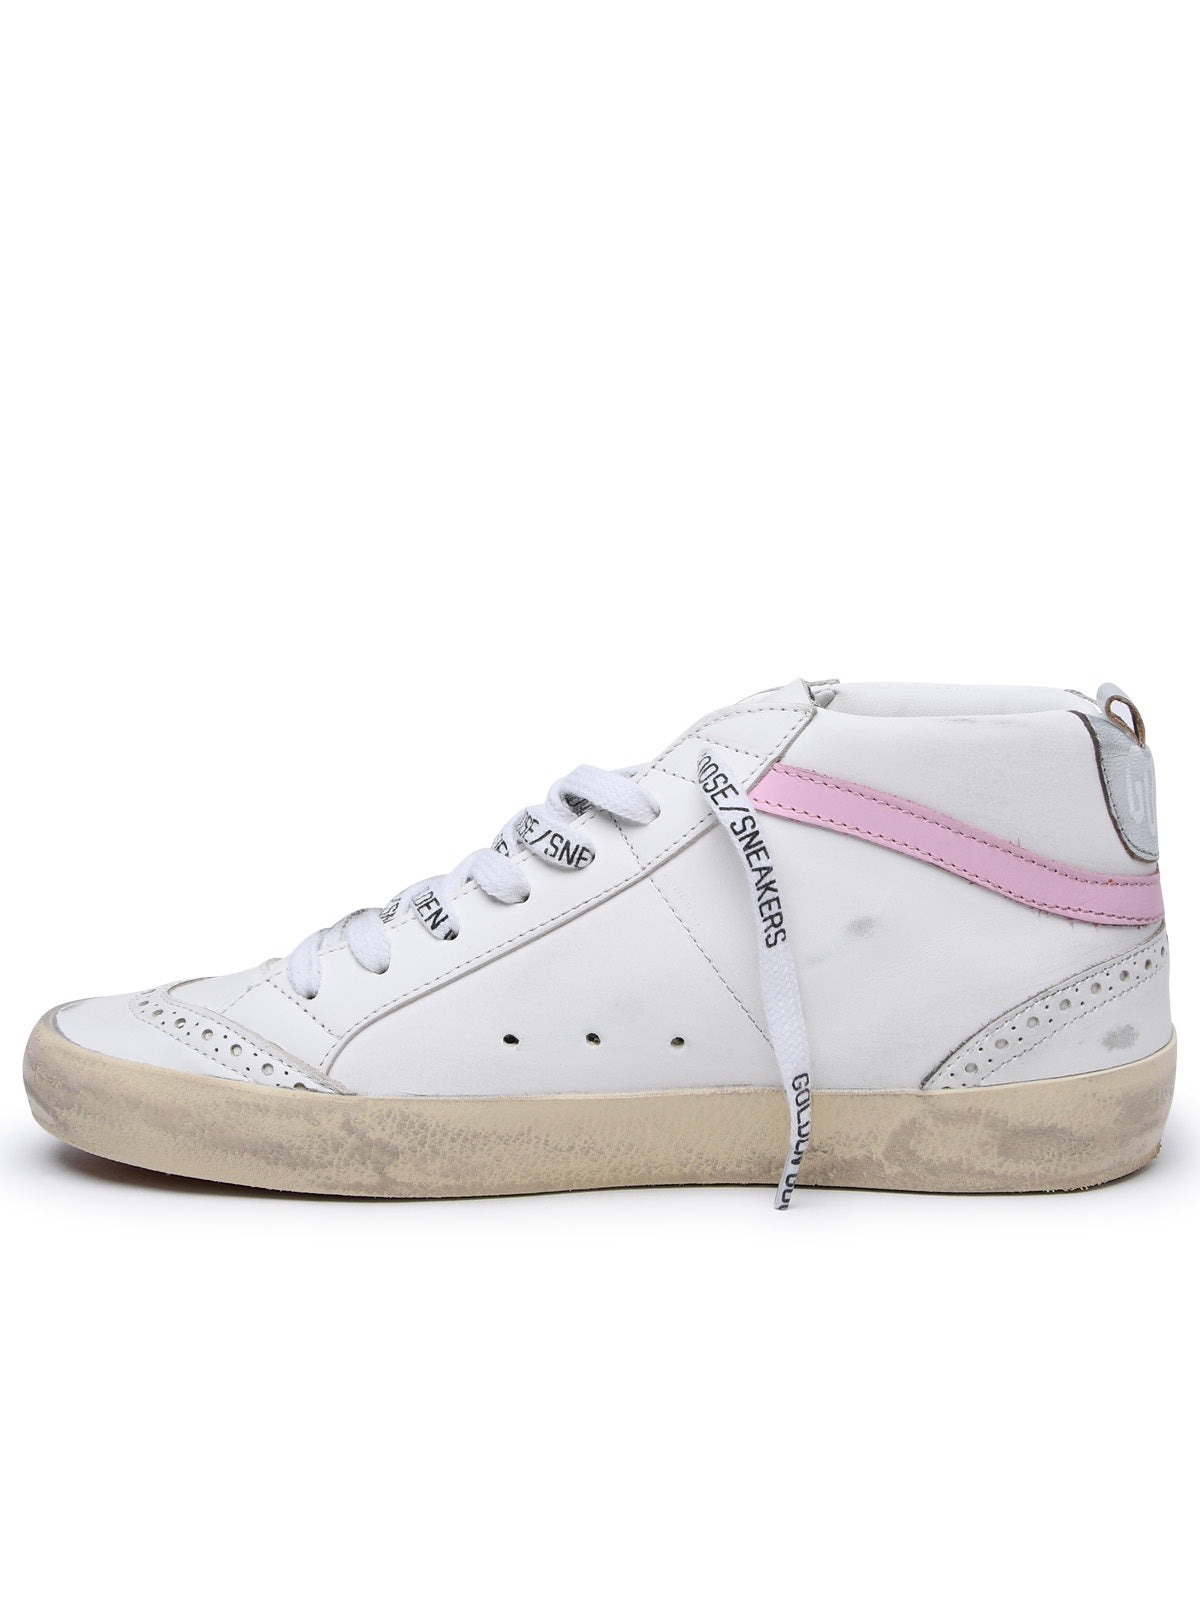 Golden Goose Woman Golden Goose 'Mid Star' White Leather Sneakers - 3